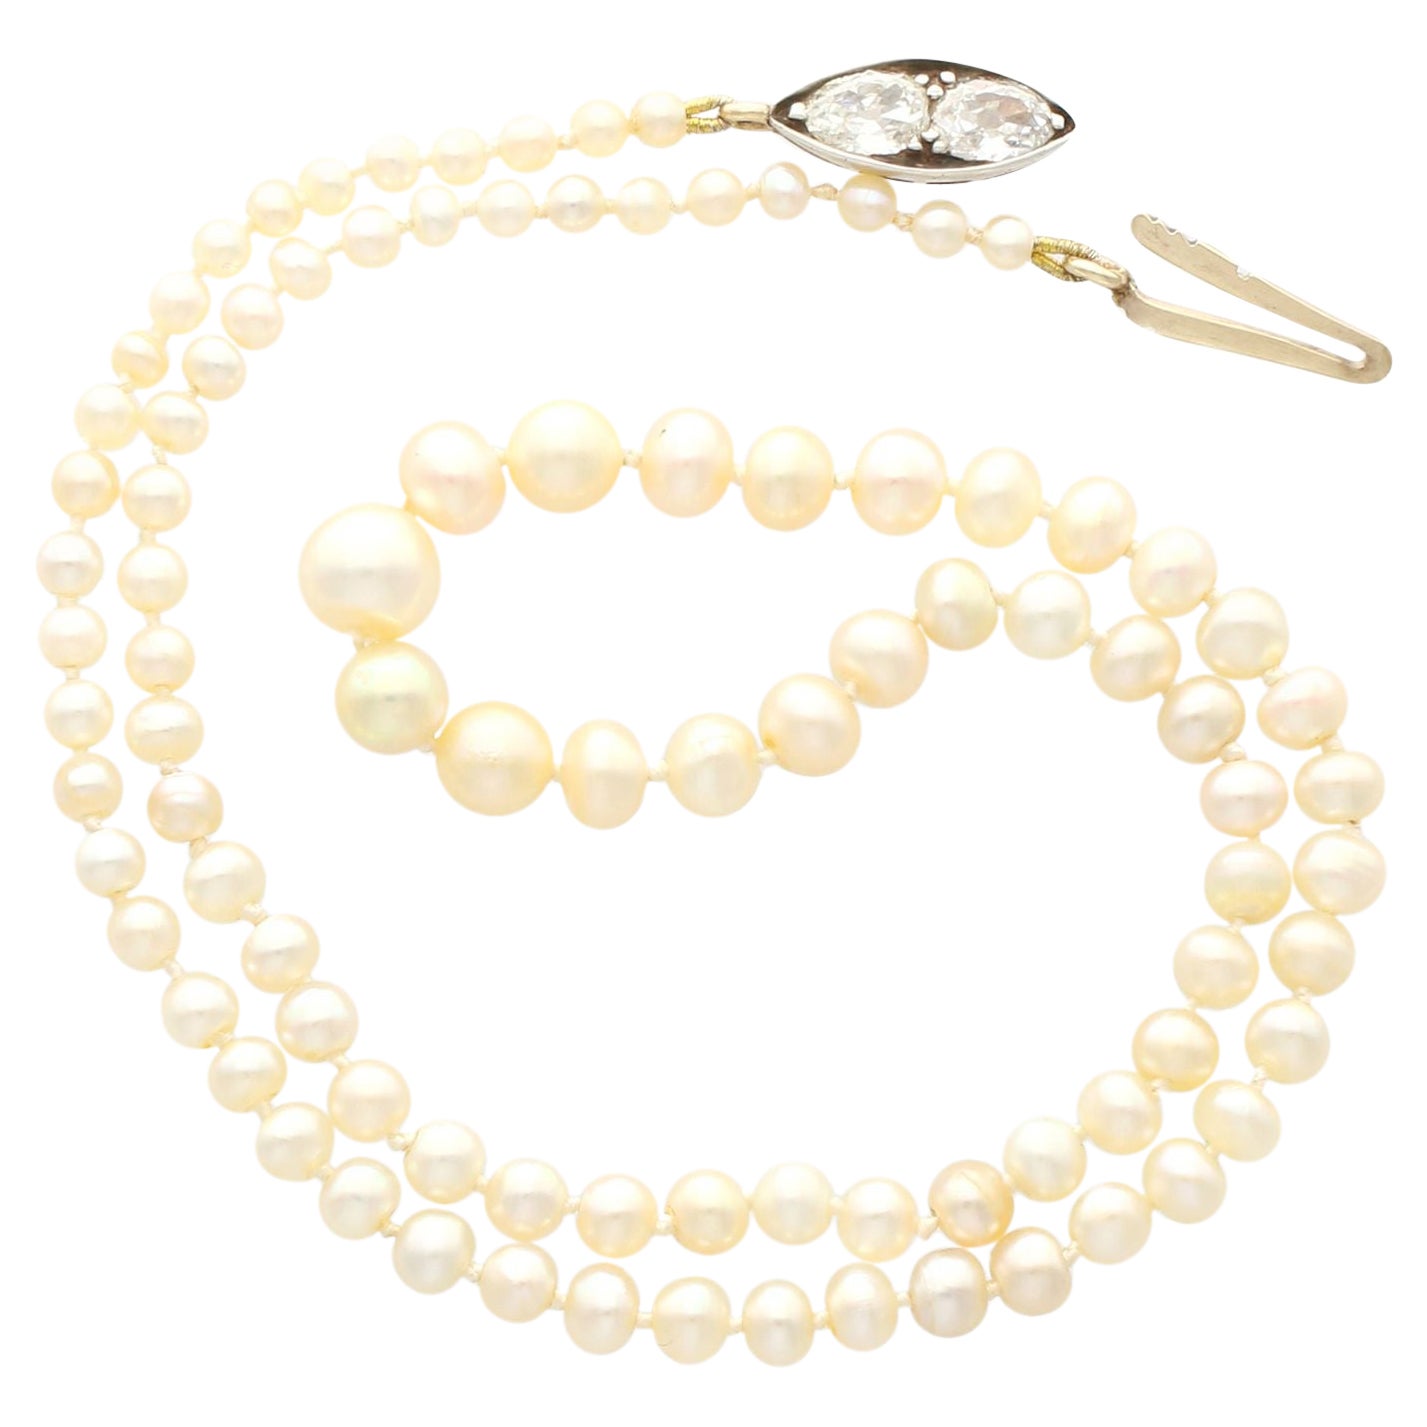 Antique Single Strand Natural Pearl Necklace with 1.02 Carat Diamond Set Clasp